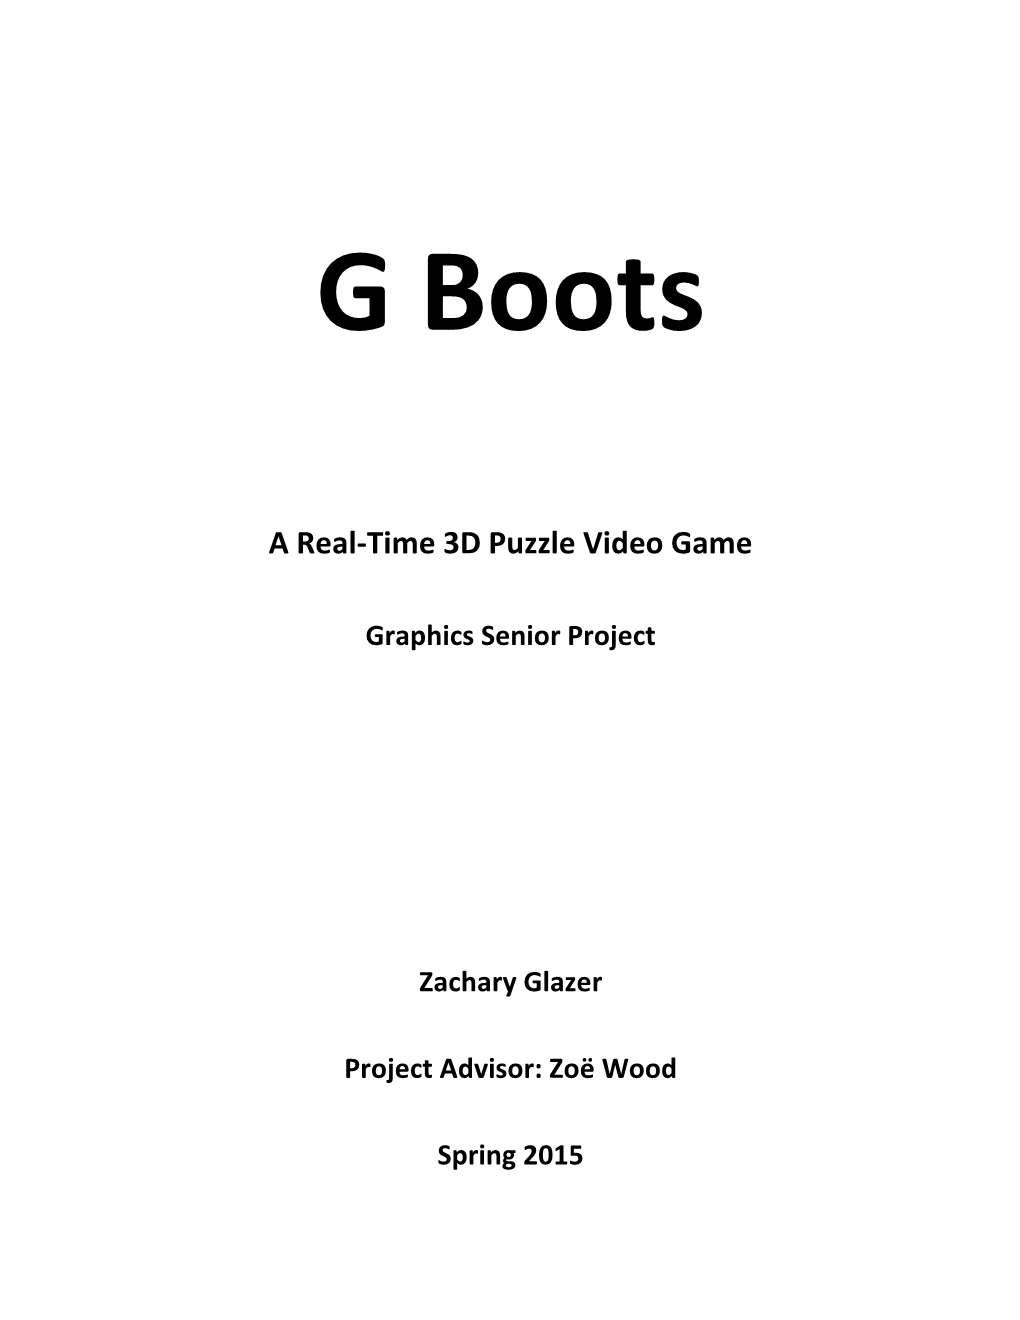 G Boots: a Real-Time 3D Puzzle Video Game Graphics Senior Project